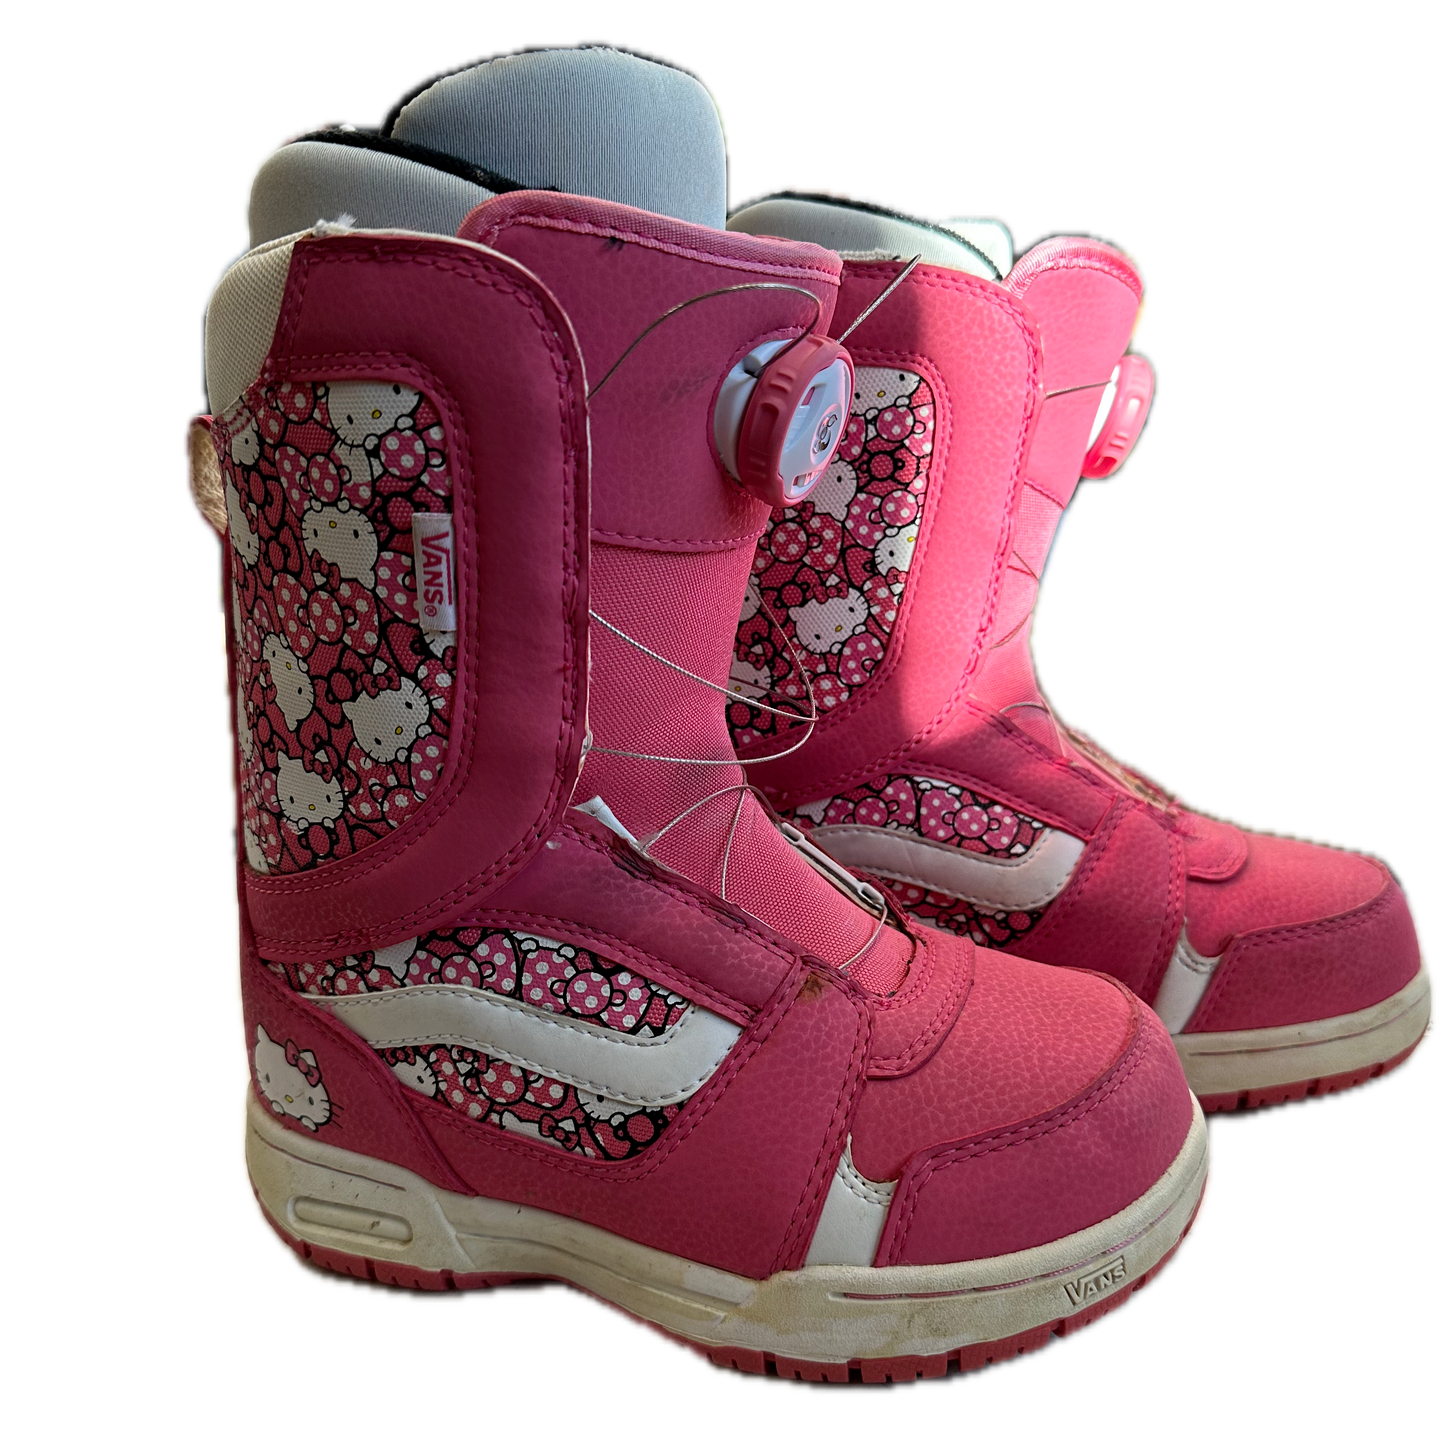 Used Vans Pink Boa Boots (CB)